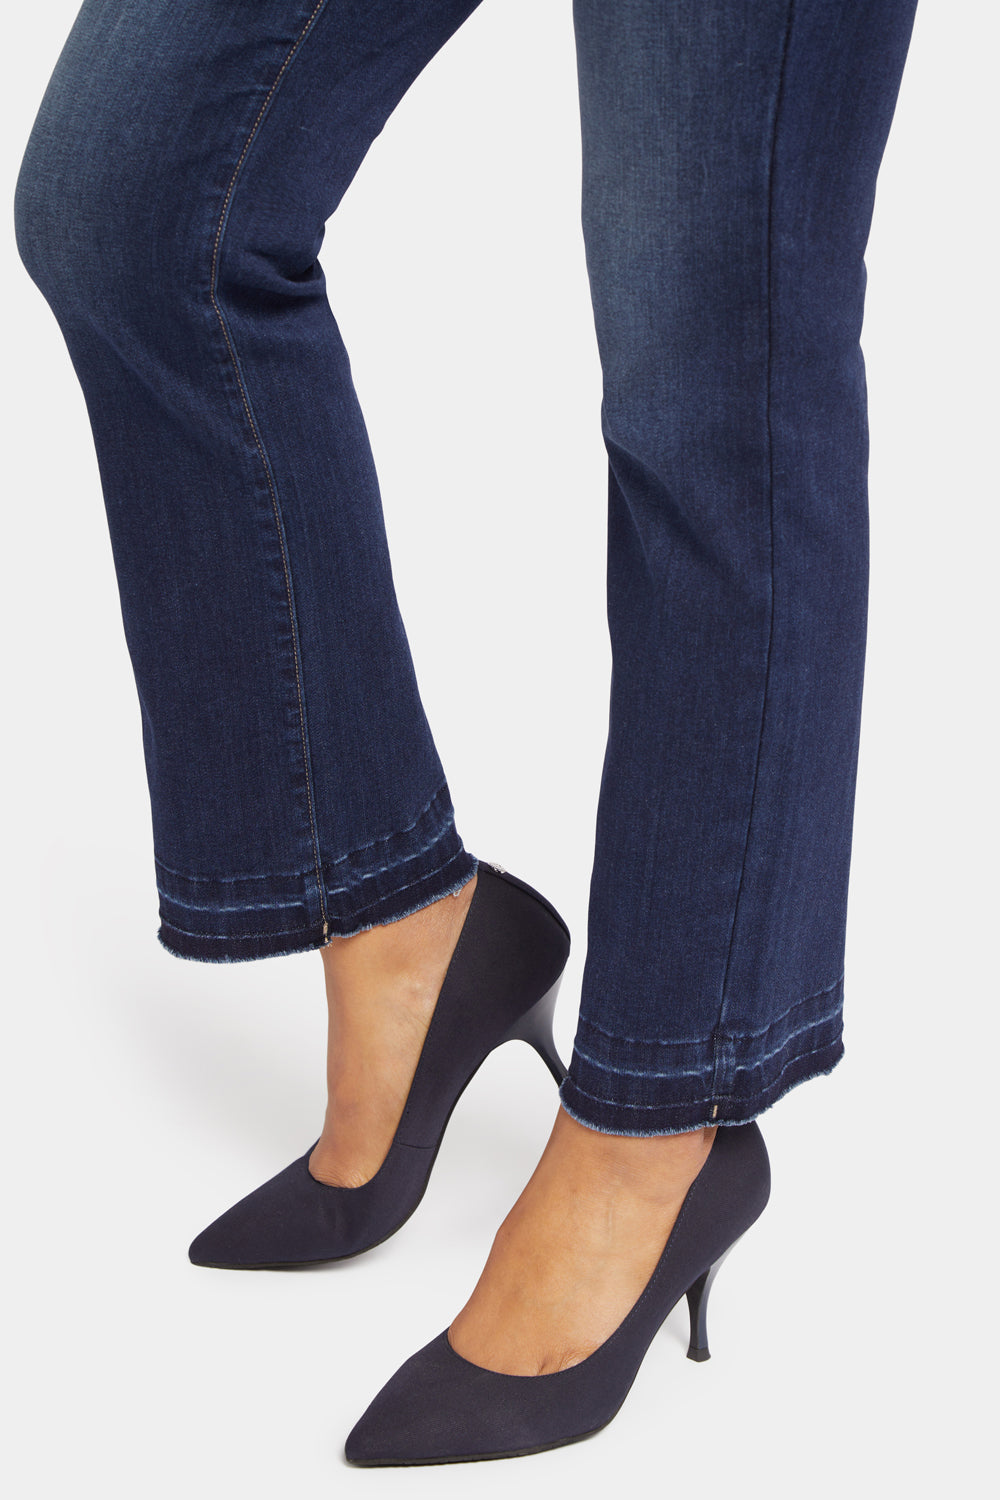 NYDJ Marilyn Straight Ankle Jeans In Sure Stretch® Denim With High Rise And Released Hems - Wonderland